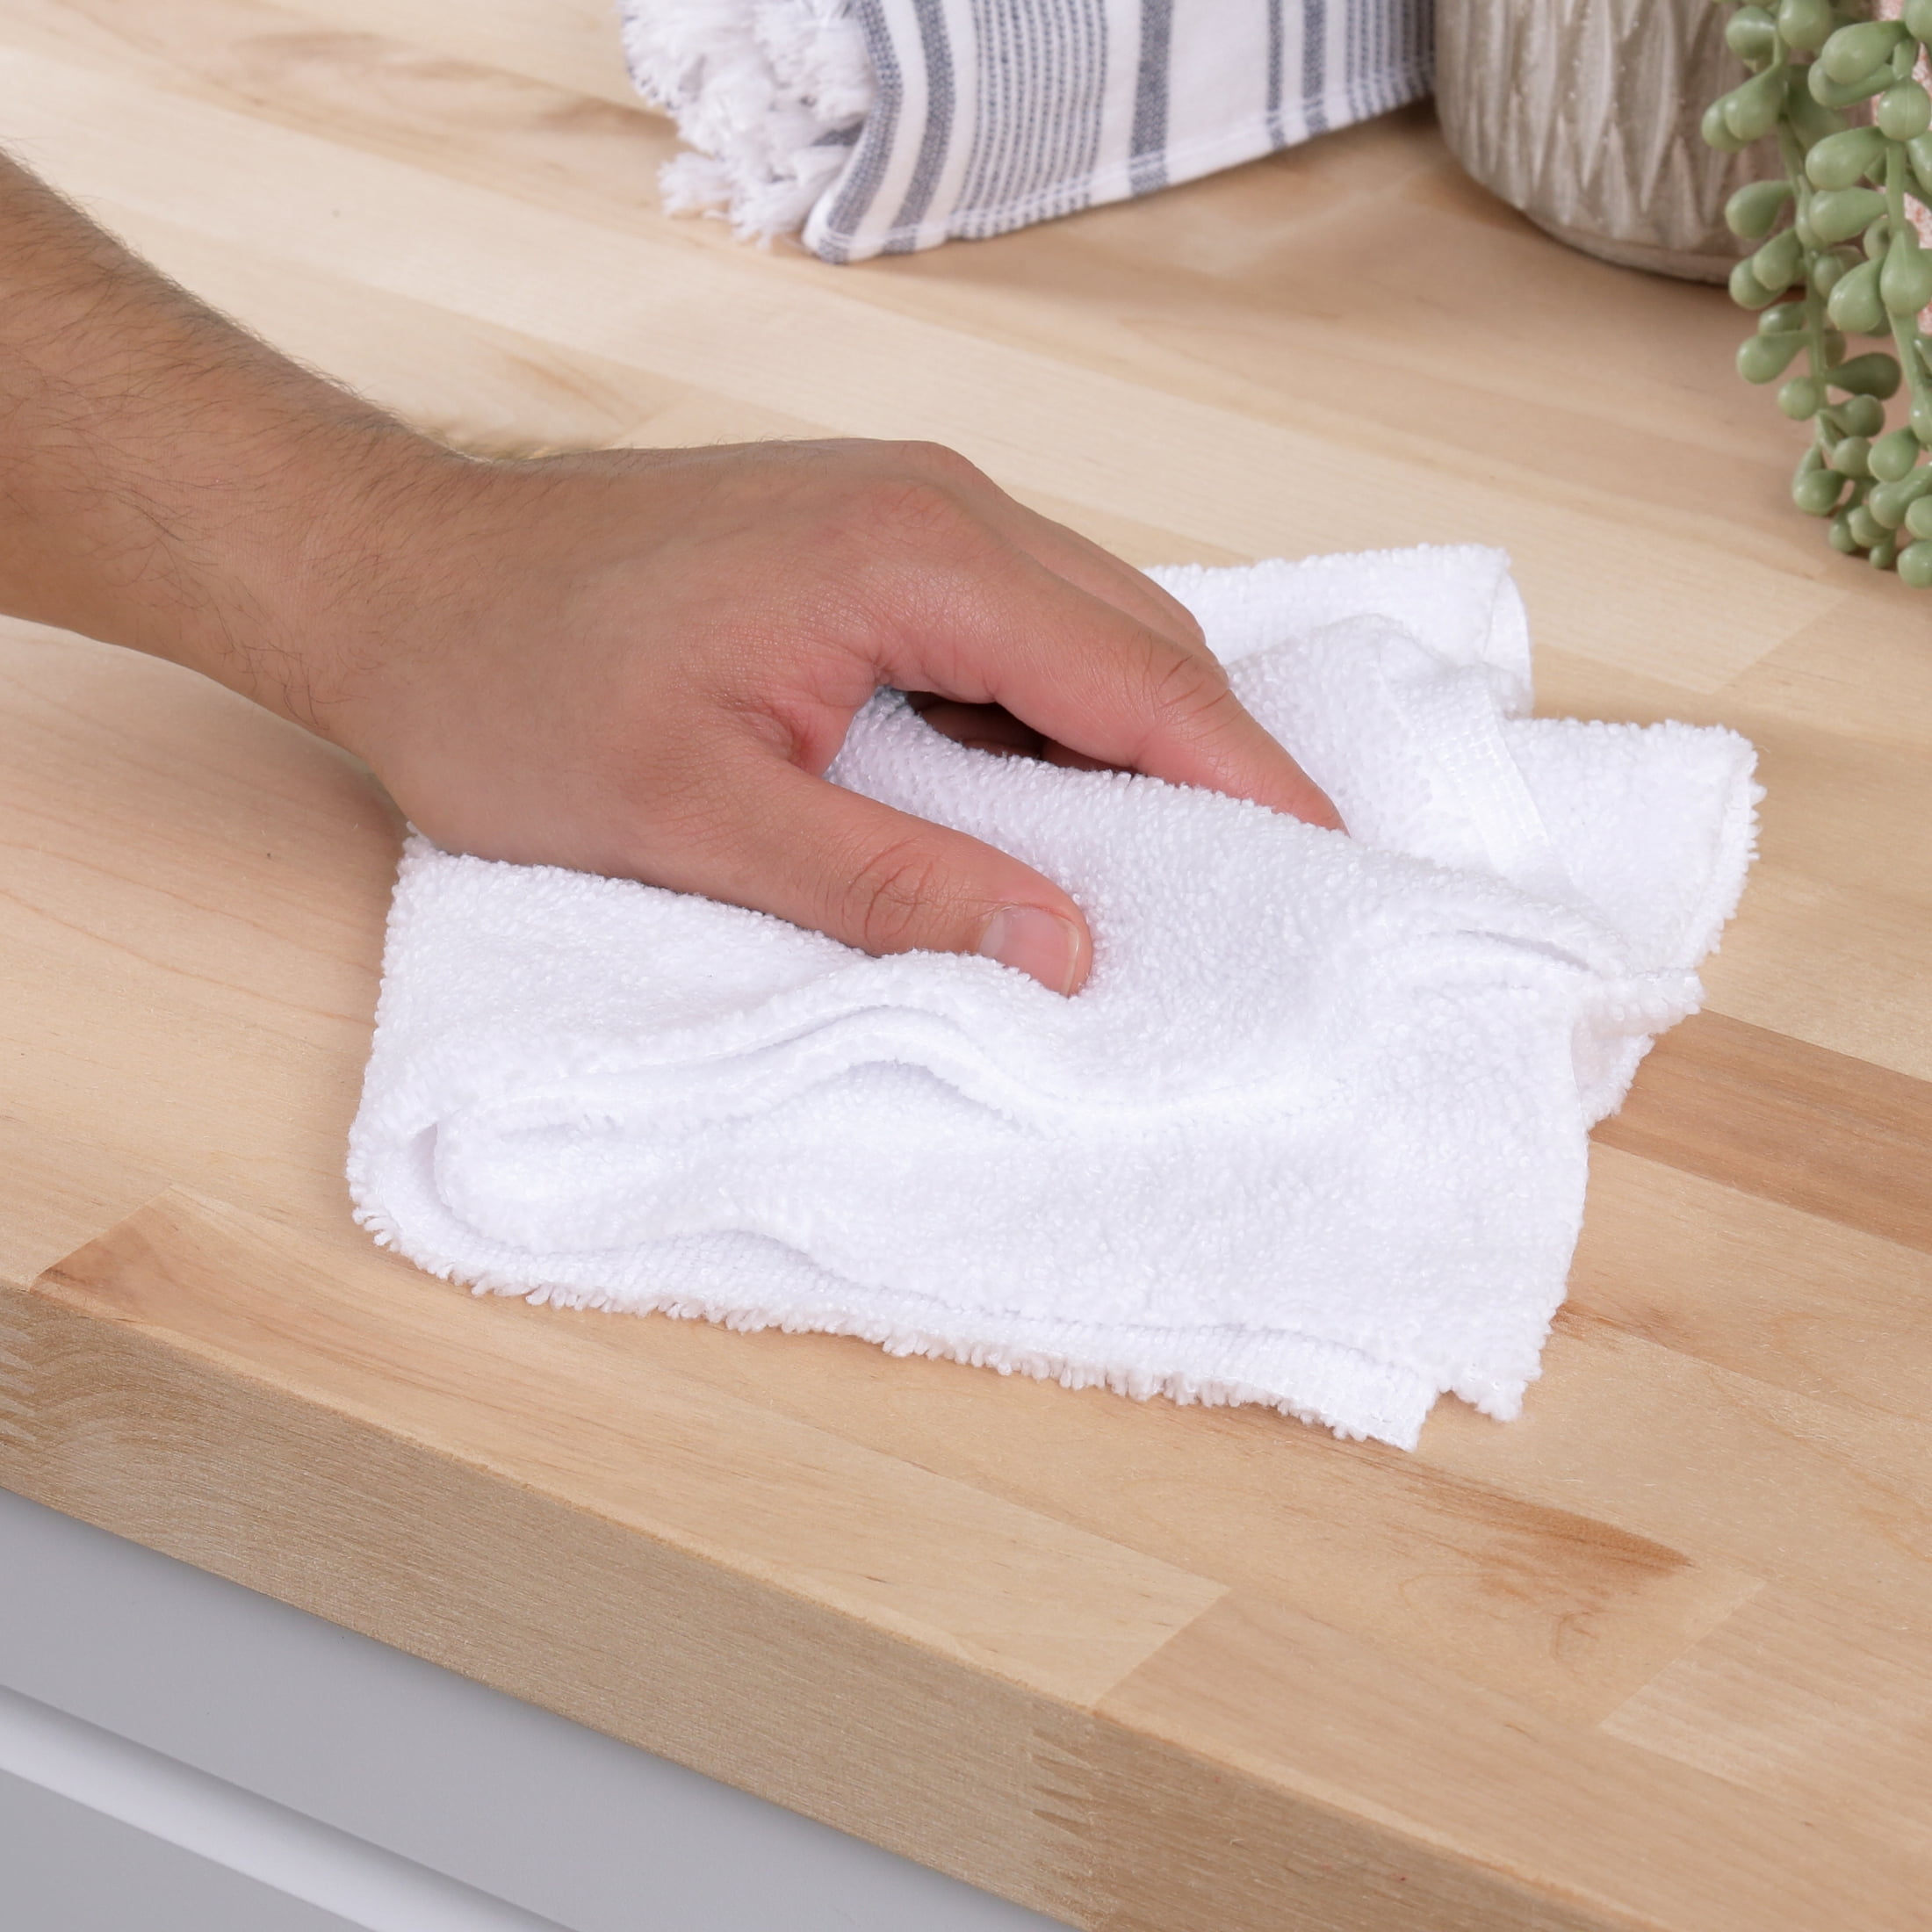 Set of 2 Large Kitchen Drying Towels - Microfiber Rugs